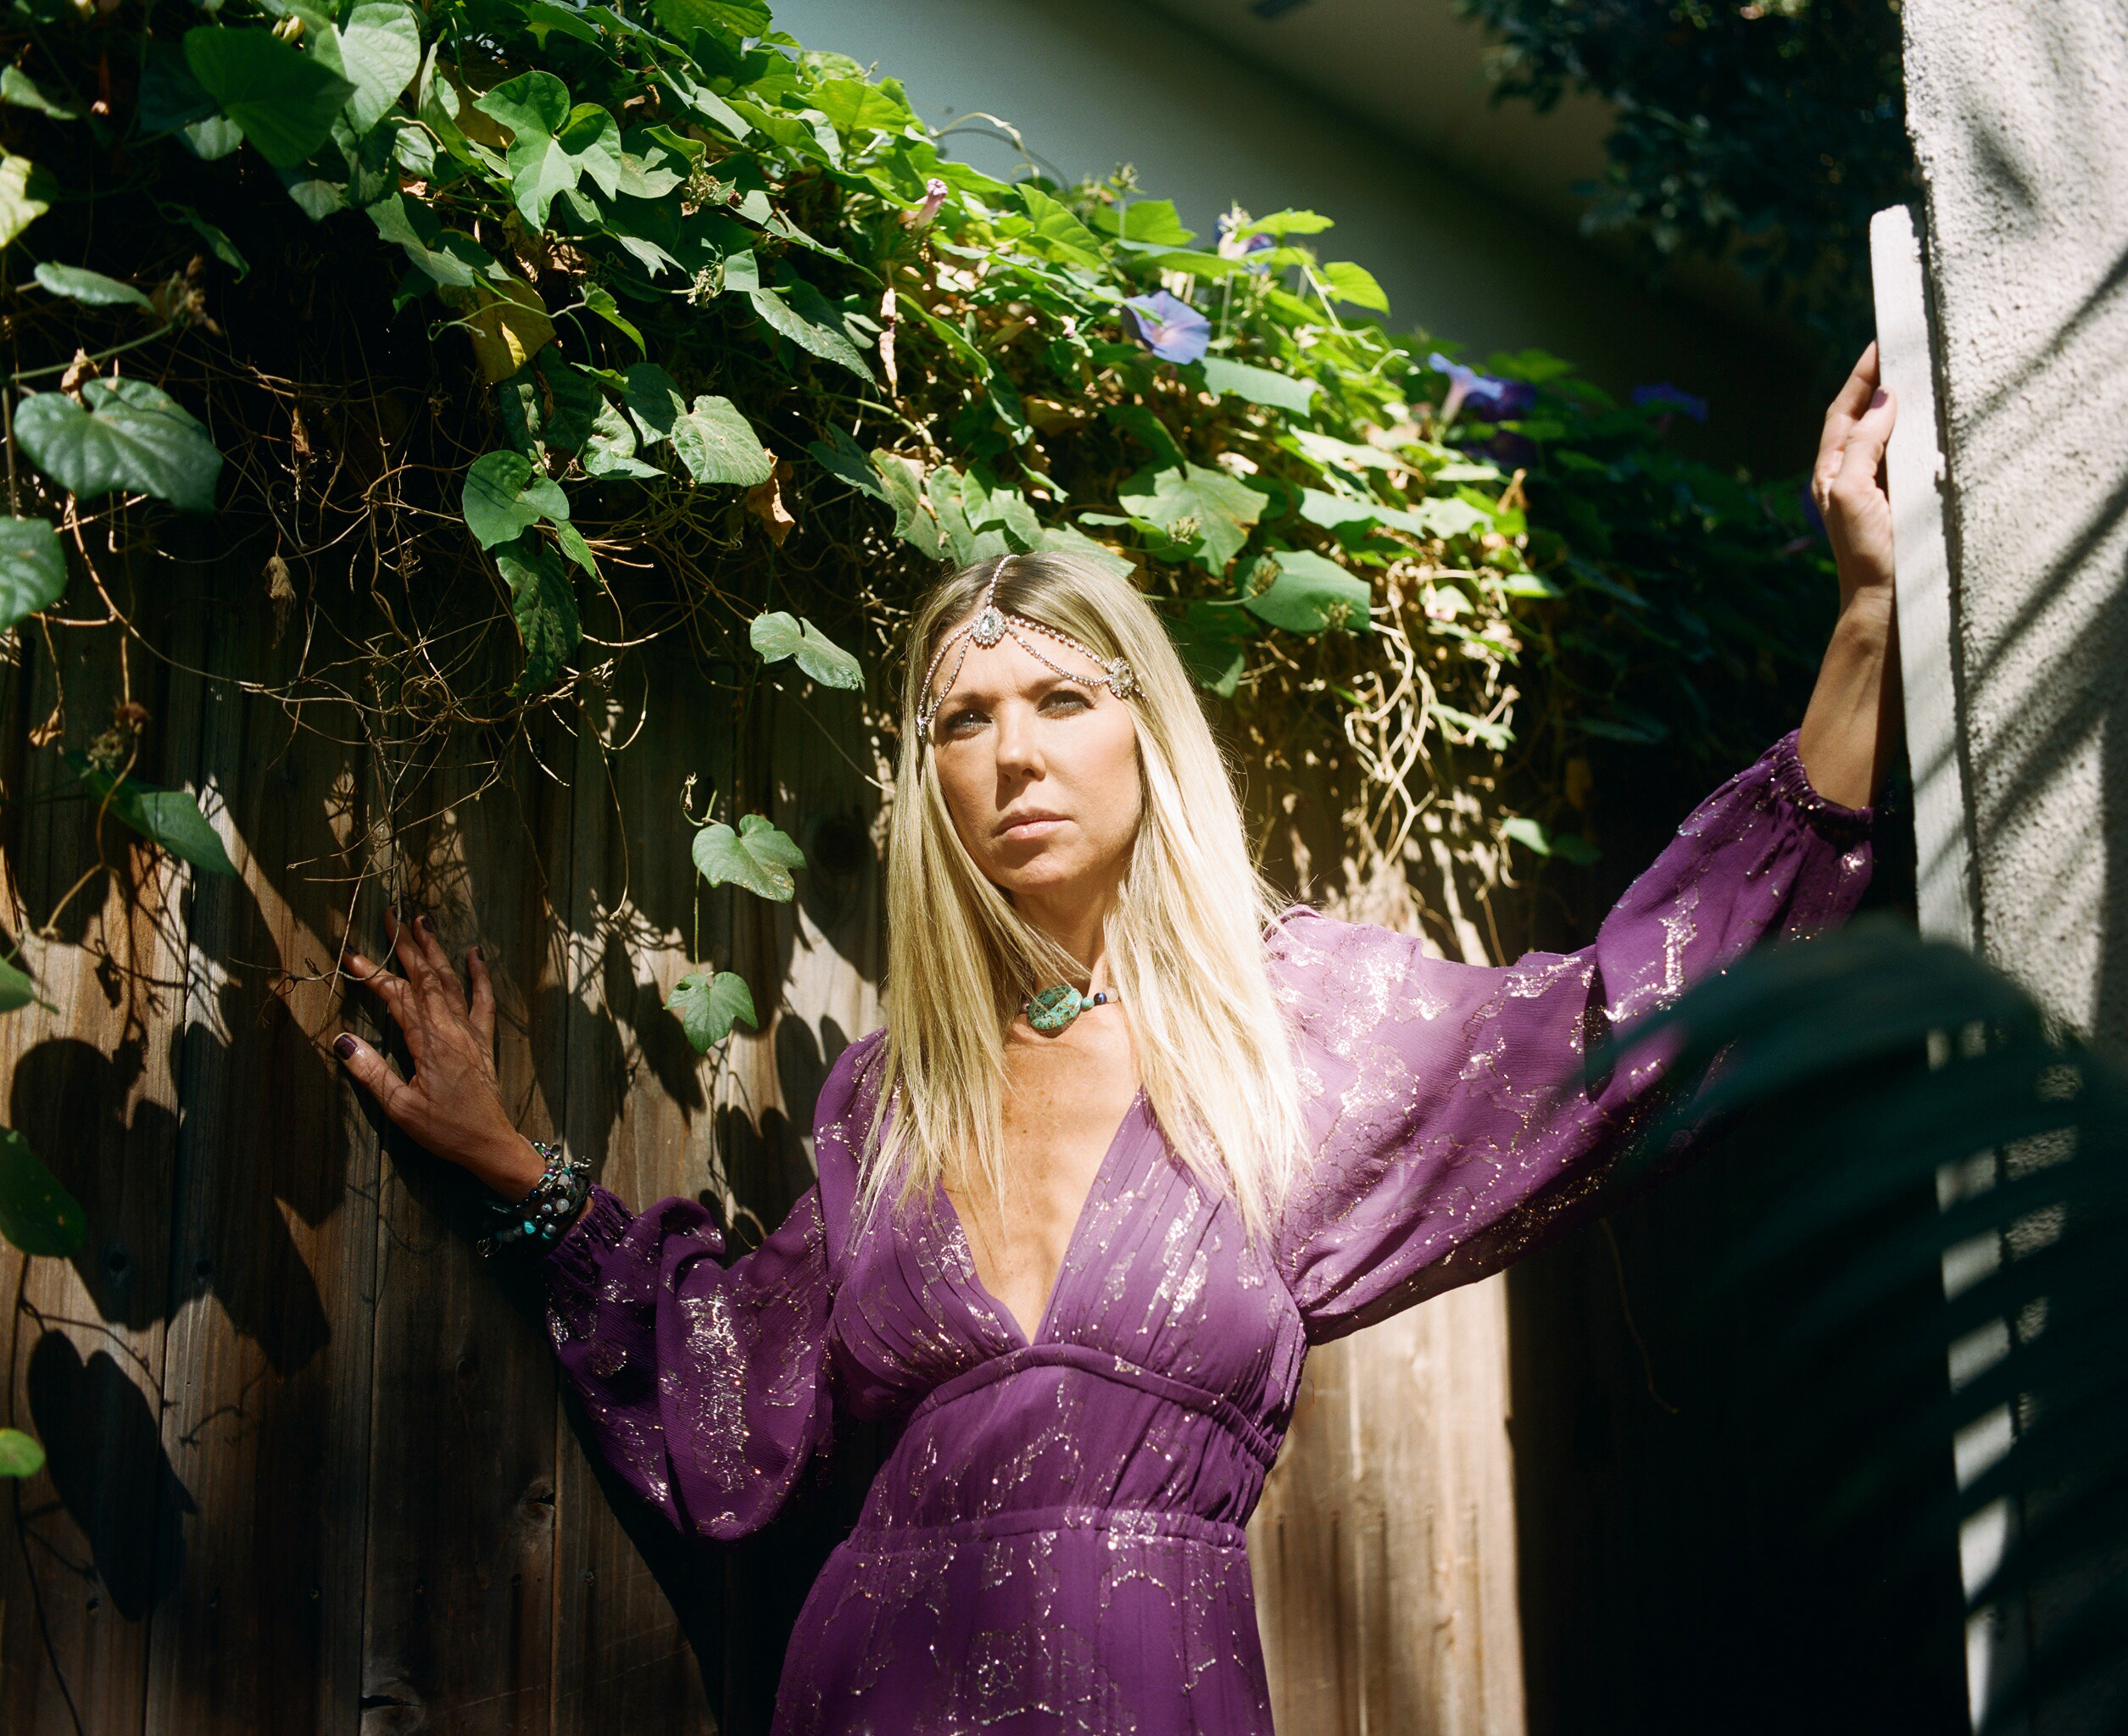 Tara Reid in a purple dress in front of a fence covered in vines 